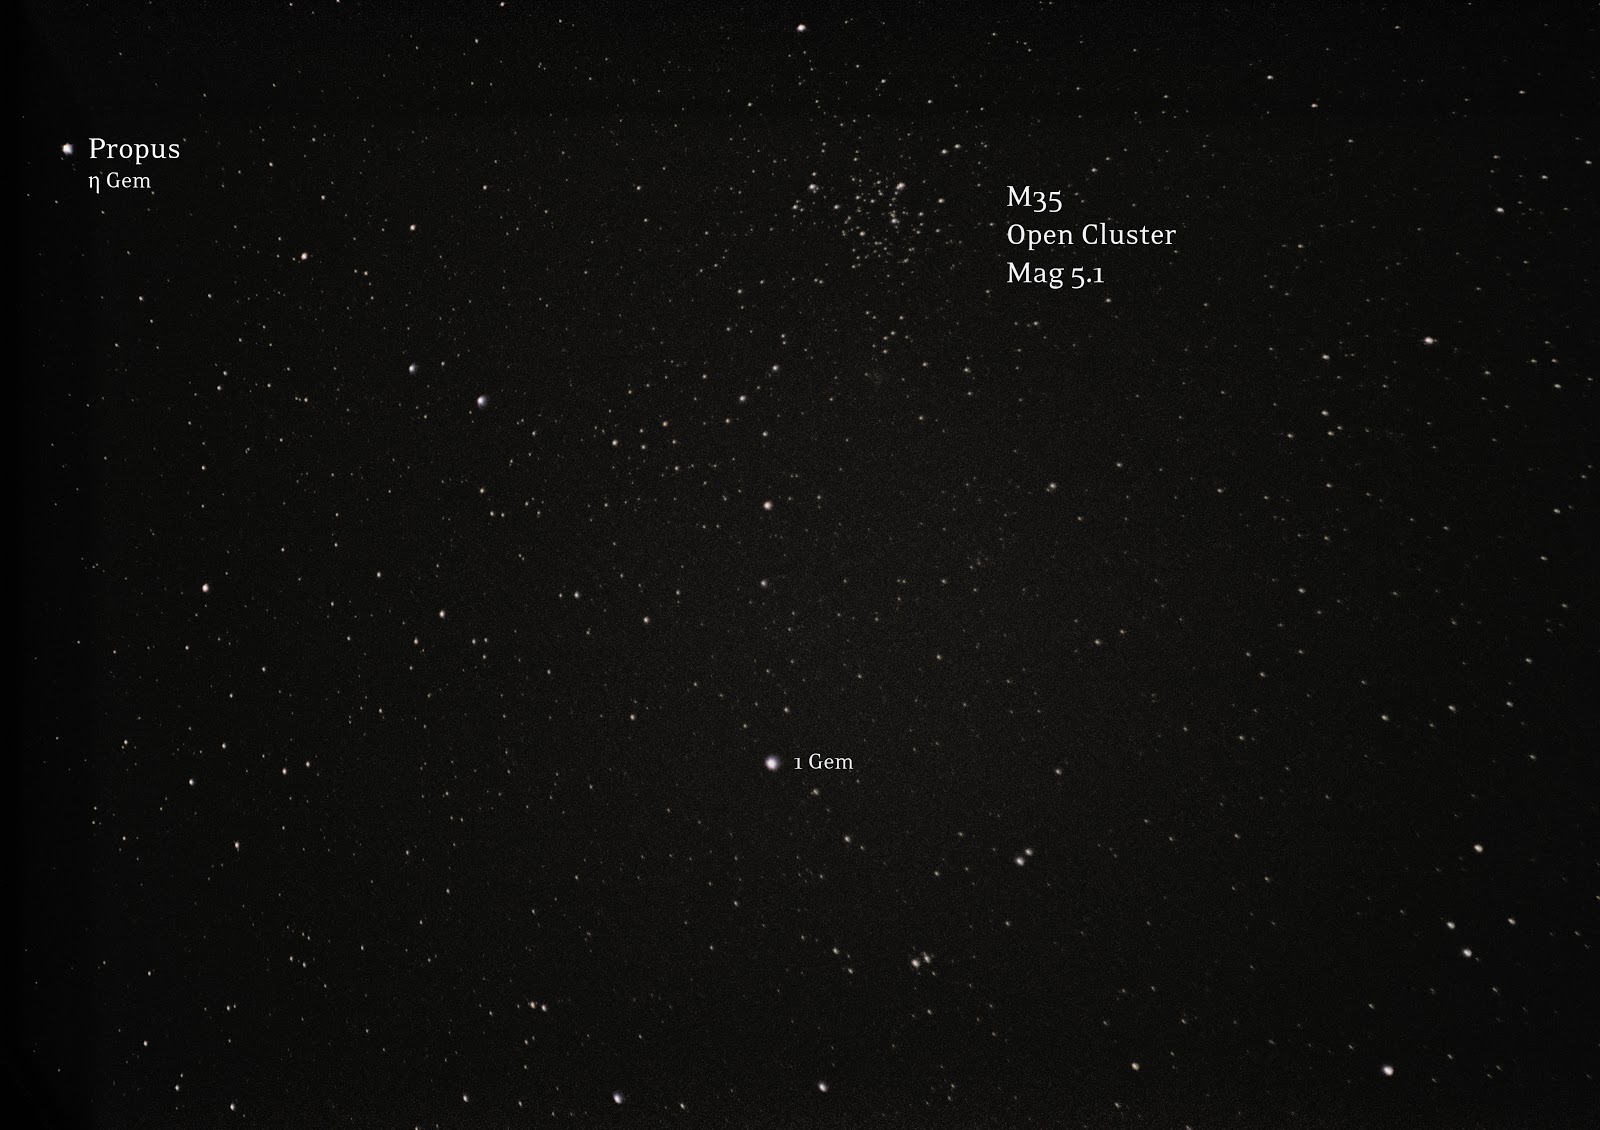 open cluster M35 and propus